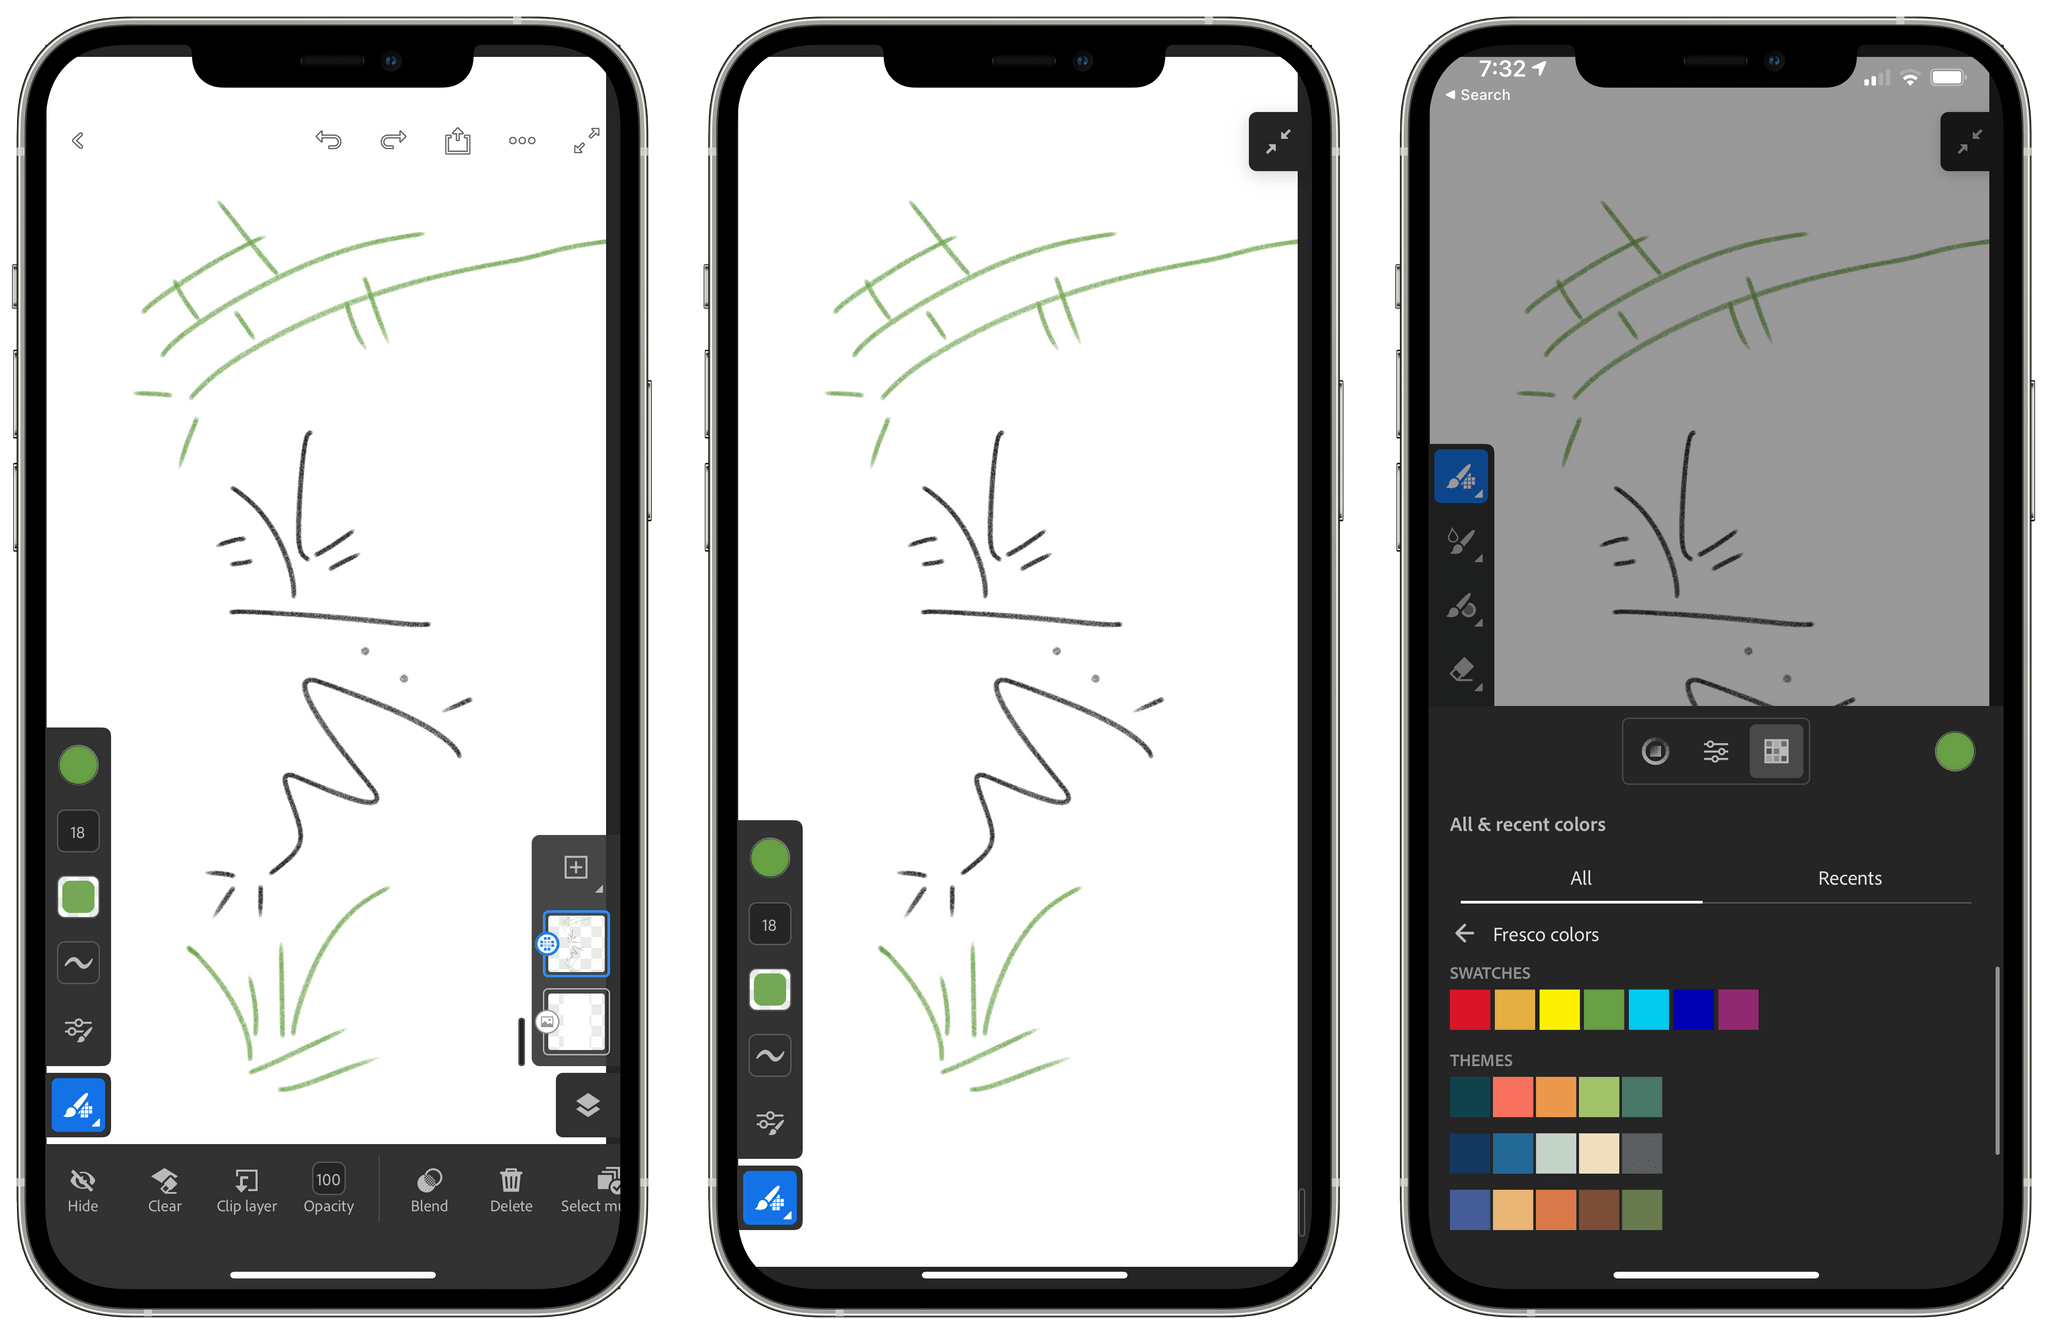 Turning up the smoothing of brushes when using Fresco on the iPhone makes drawing with your finger look nicer than it might otherwise.